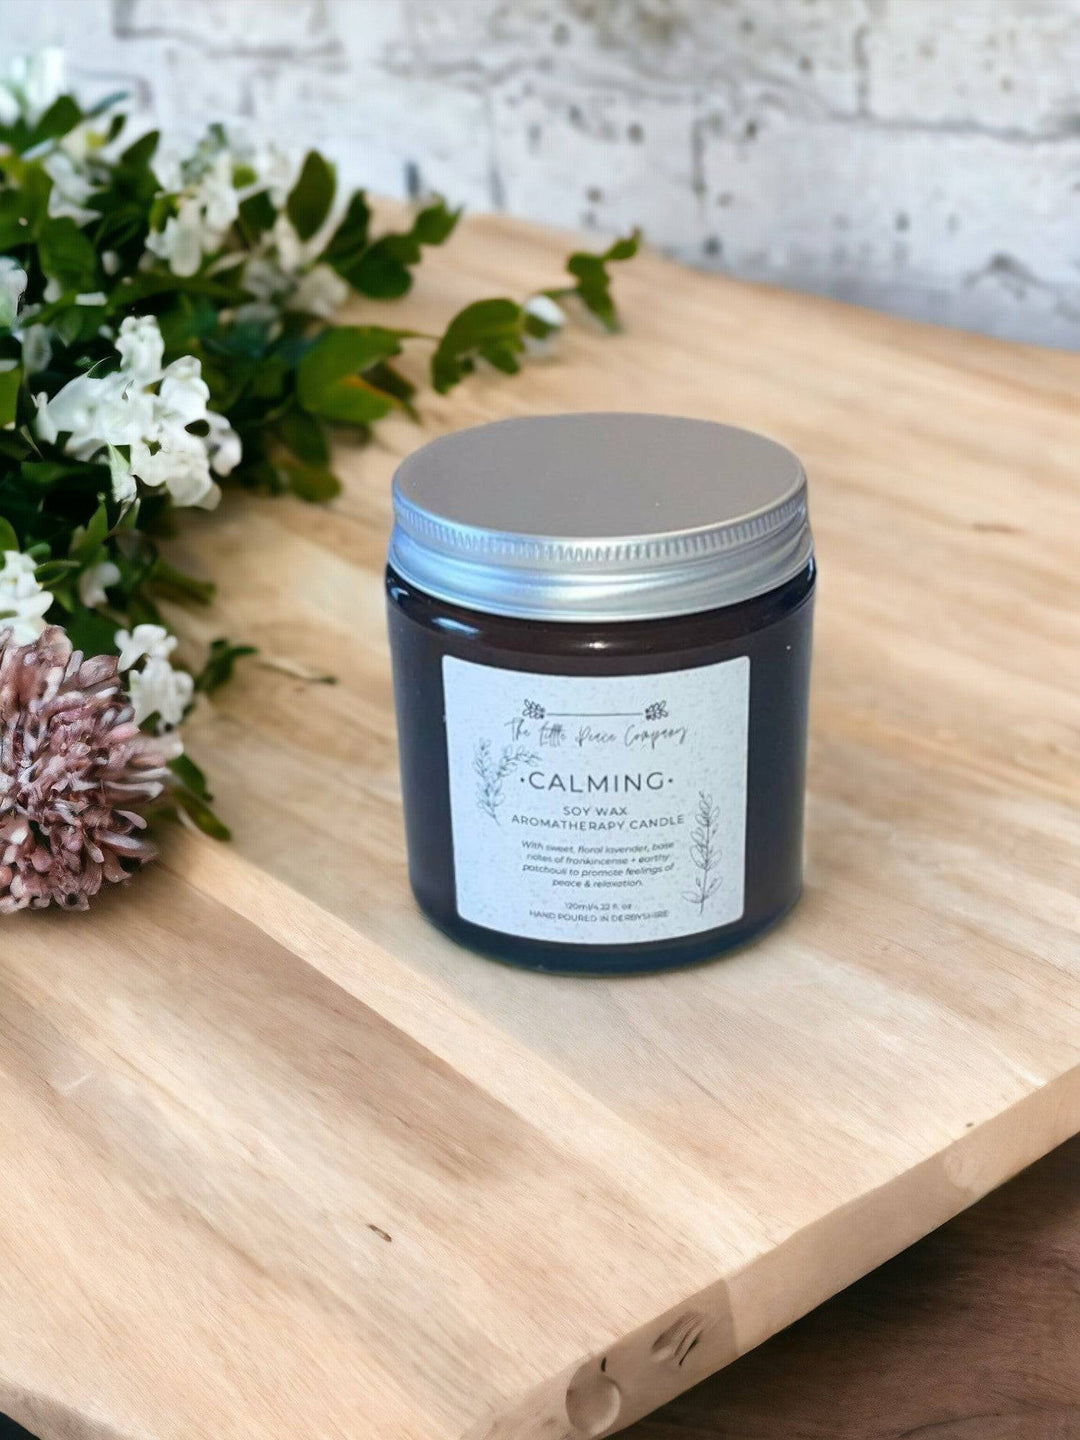 Soy Wax Aromatherapy Candle - TidySpaces